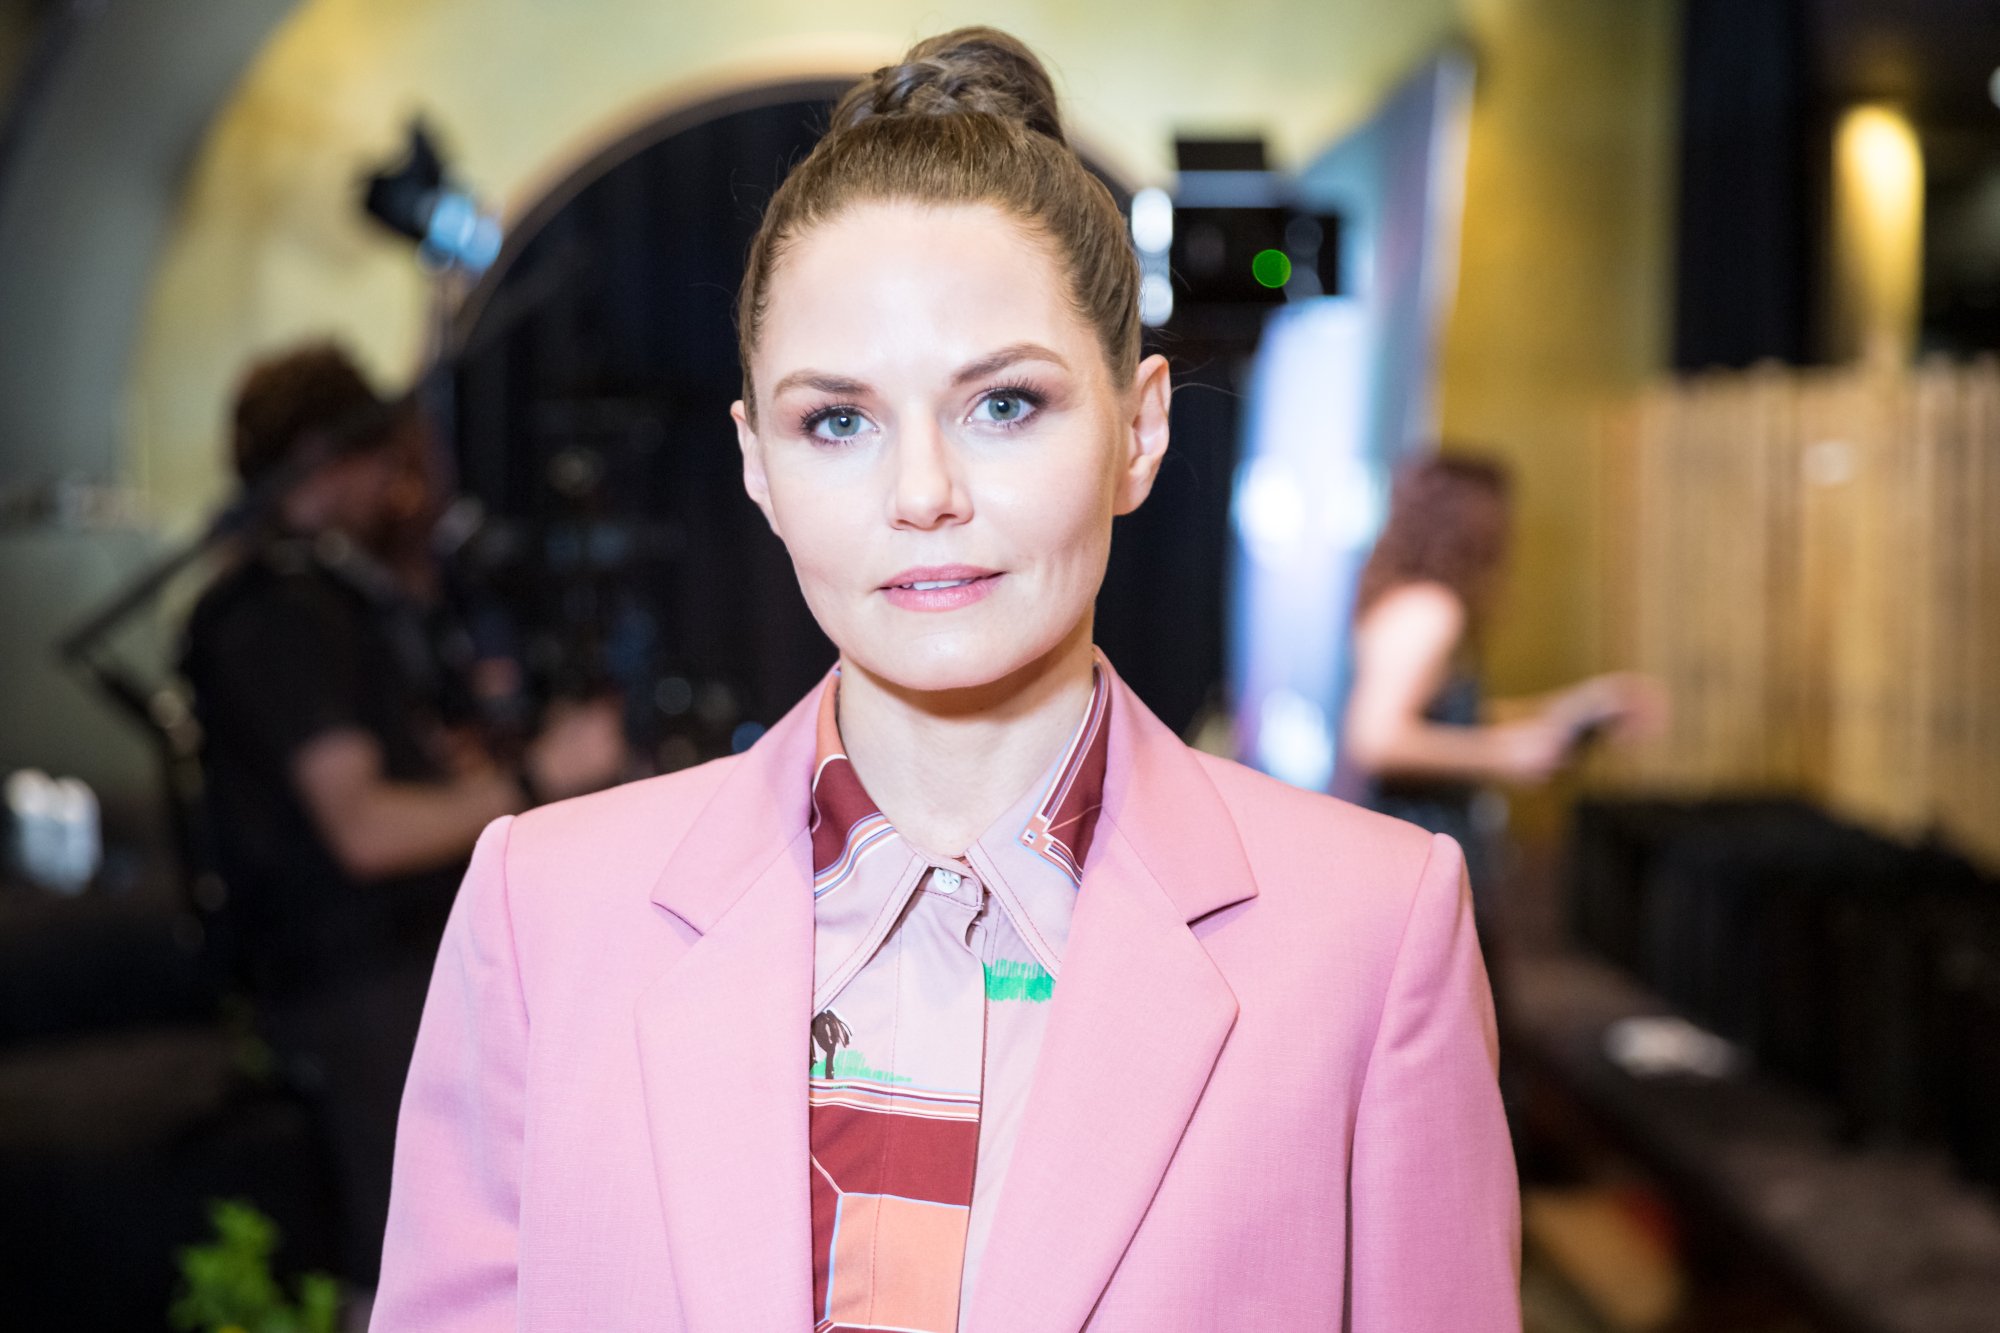 'This Is Us' star Jennifer Morrison. She's wearing a blouse with different shades of pink and a pink blazer. Her hair is pulled into a bun, and she's looking directly at the camera.